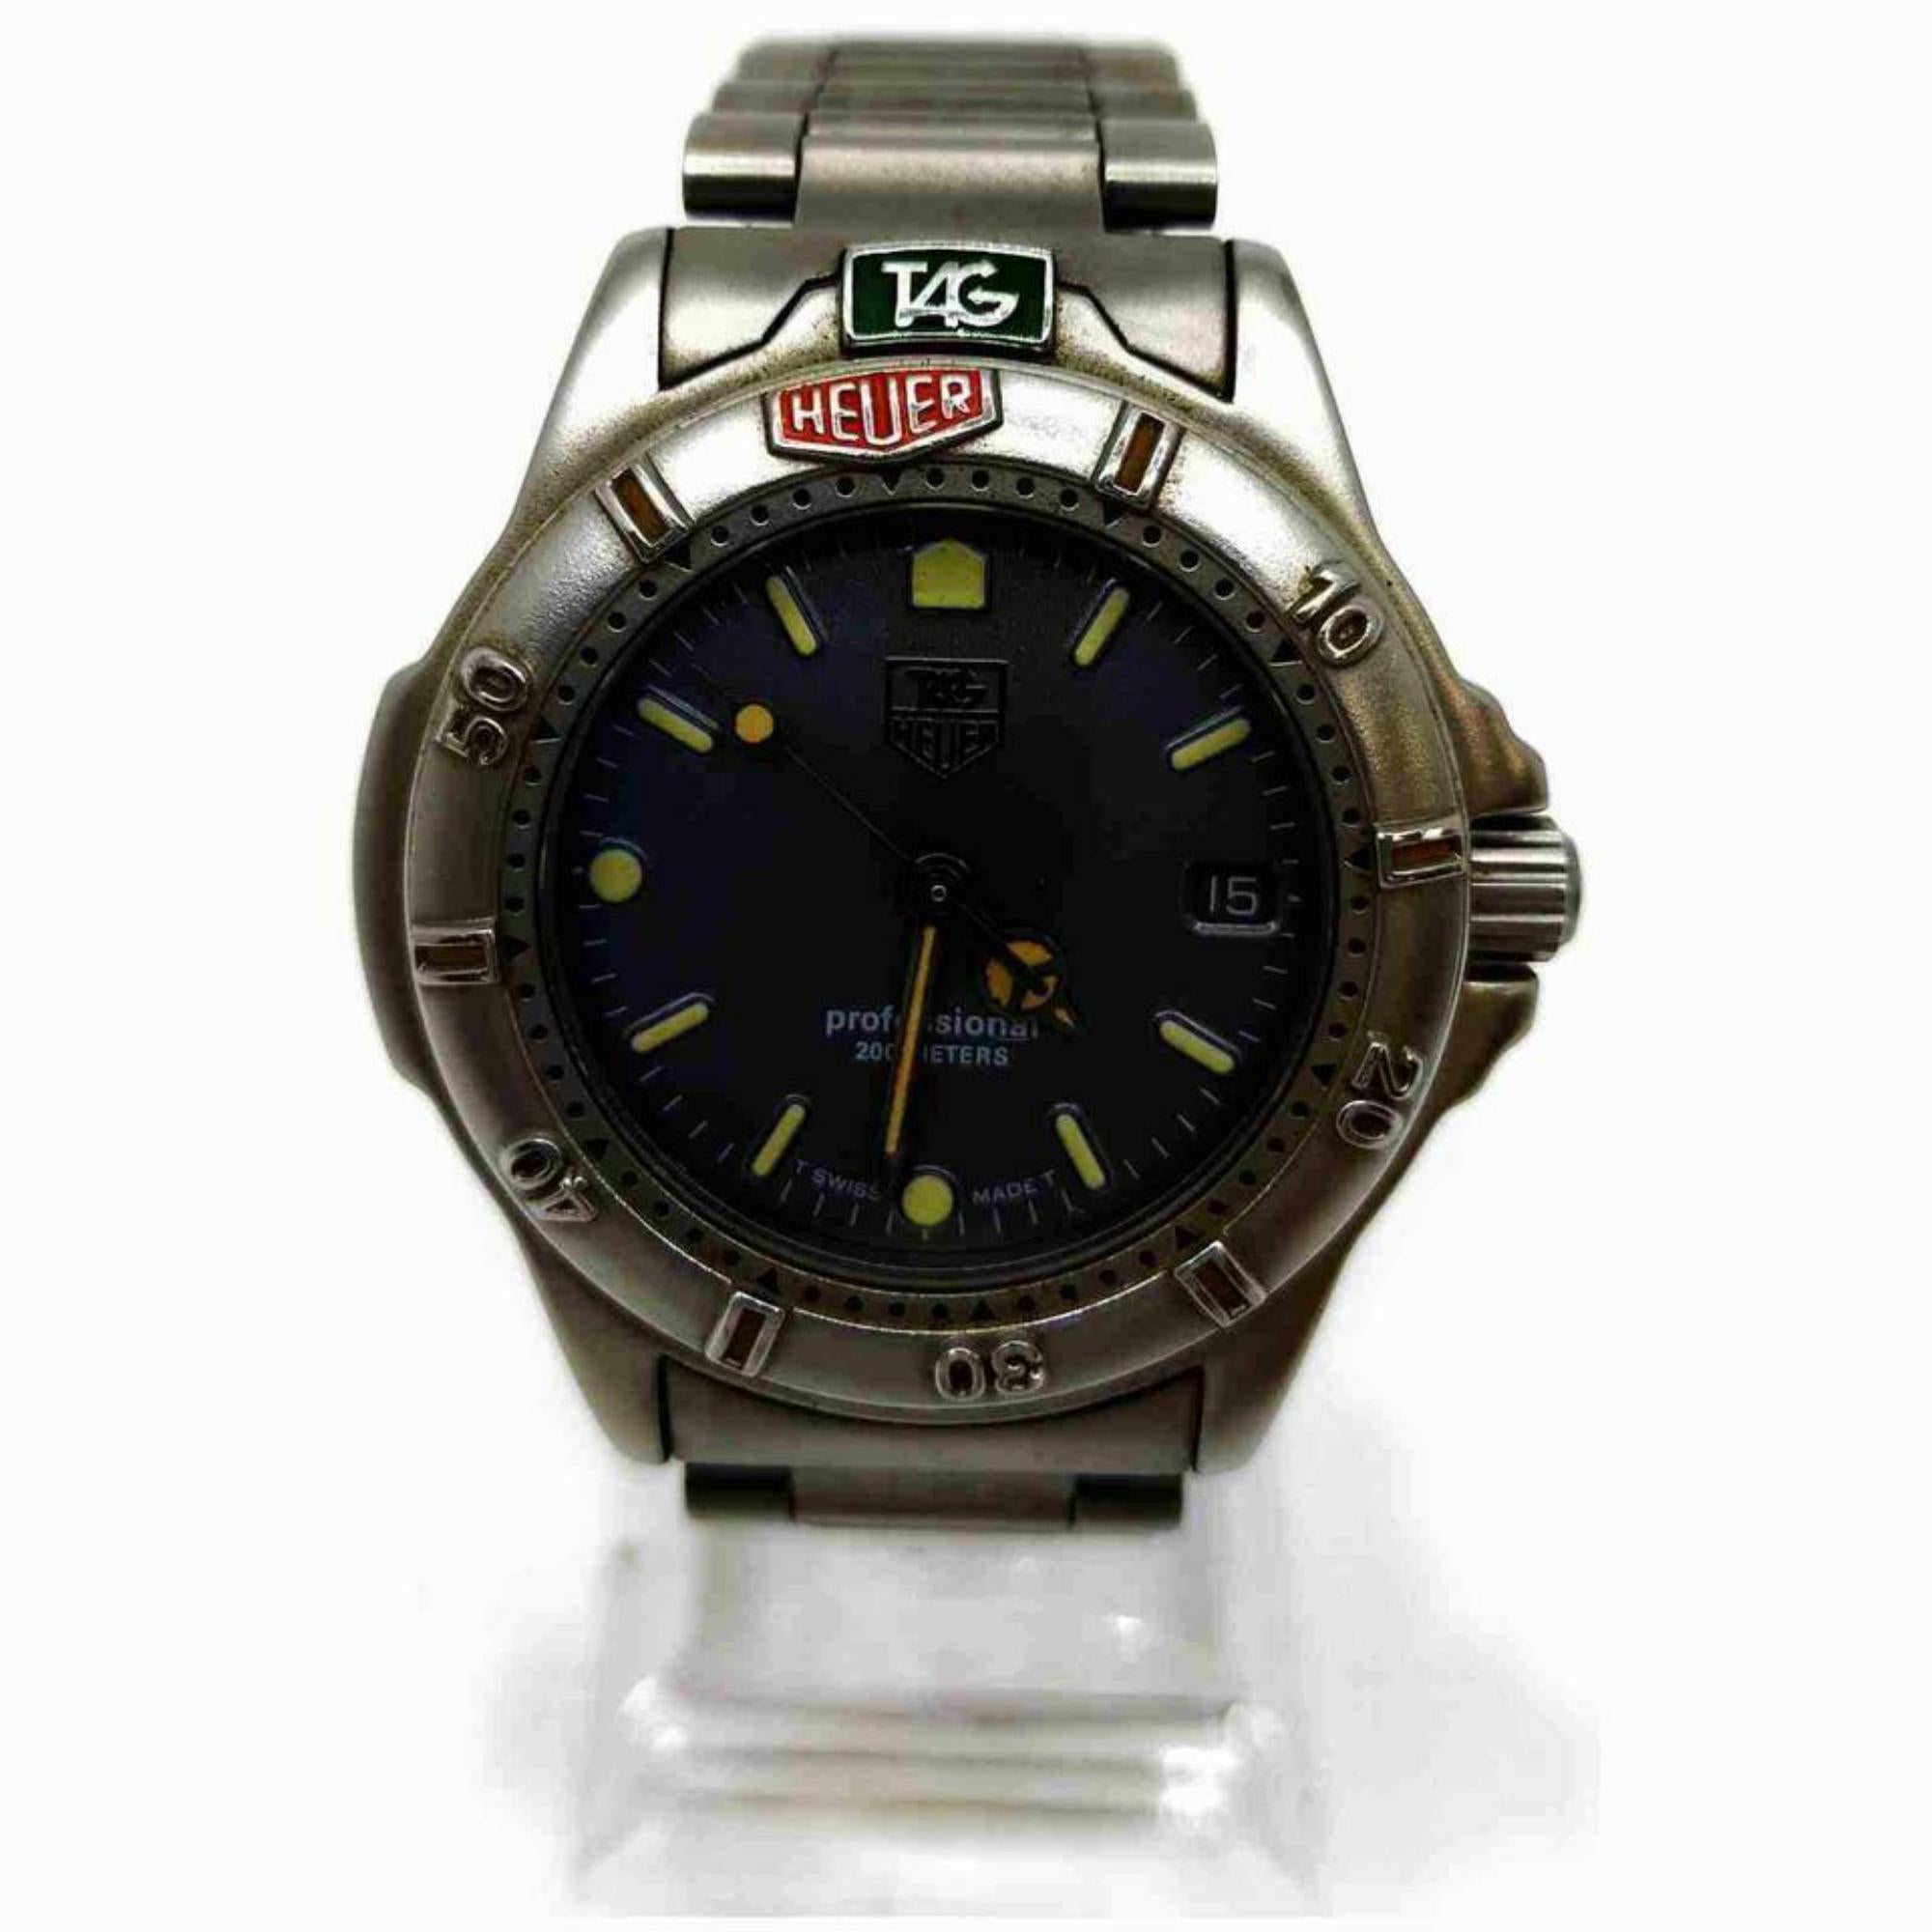 TAG Heuer 37mm 200m 999.213 Professional 4000 855821
    Be the first to write a review.
Condition:
Pre-ownedPre-owned
“This item has visible signs of wear”
Price:
US $612.00
Was US $765.00 
Save US $153.00 (20% off)
Buy It Now
Add to cart
Best